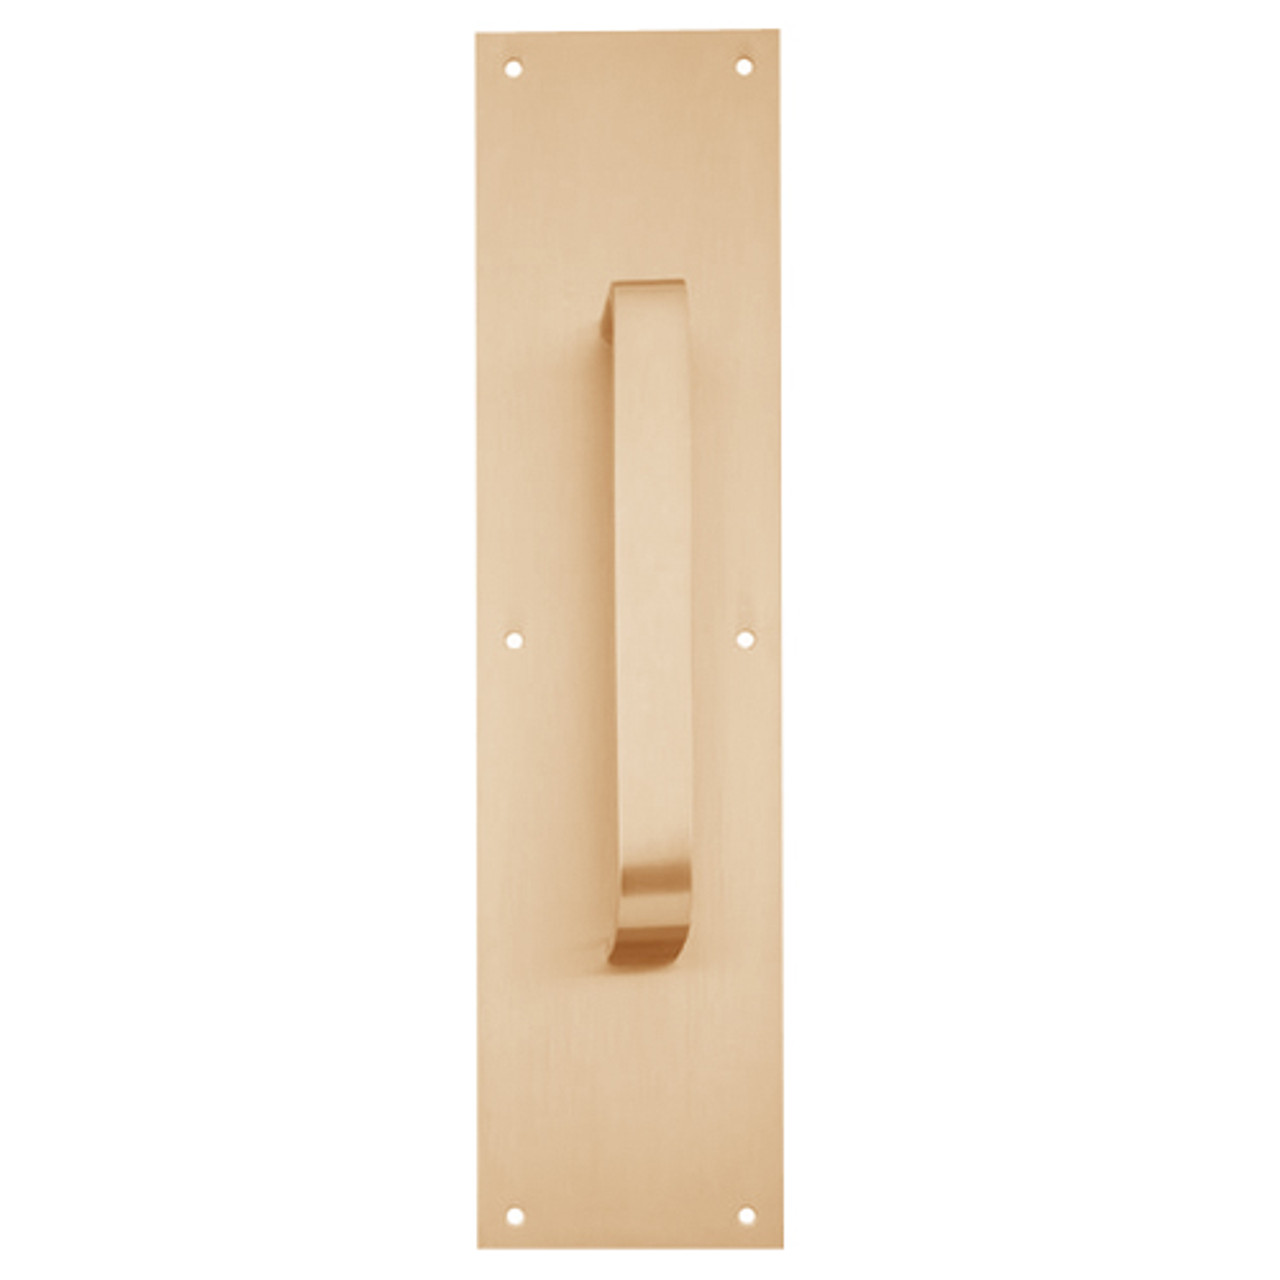 8305-10-US10-4x16 IVES Architectural Door Trim 4x16 Inch Pull Plate in Satin Bronze